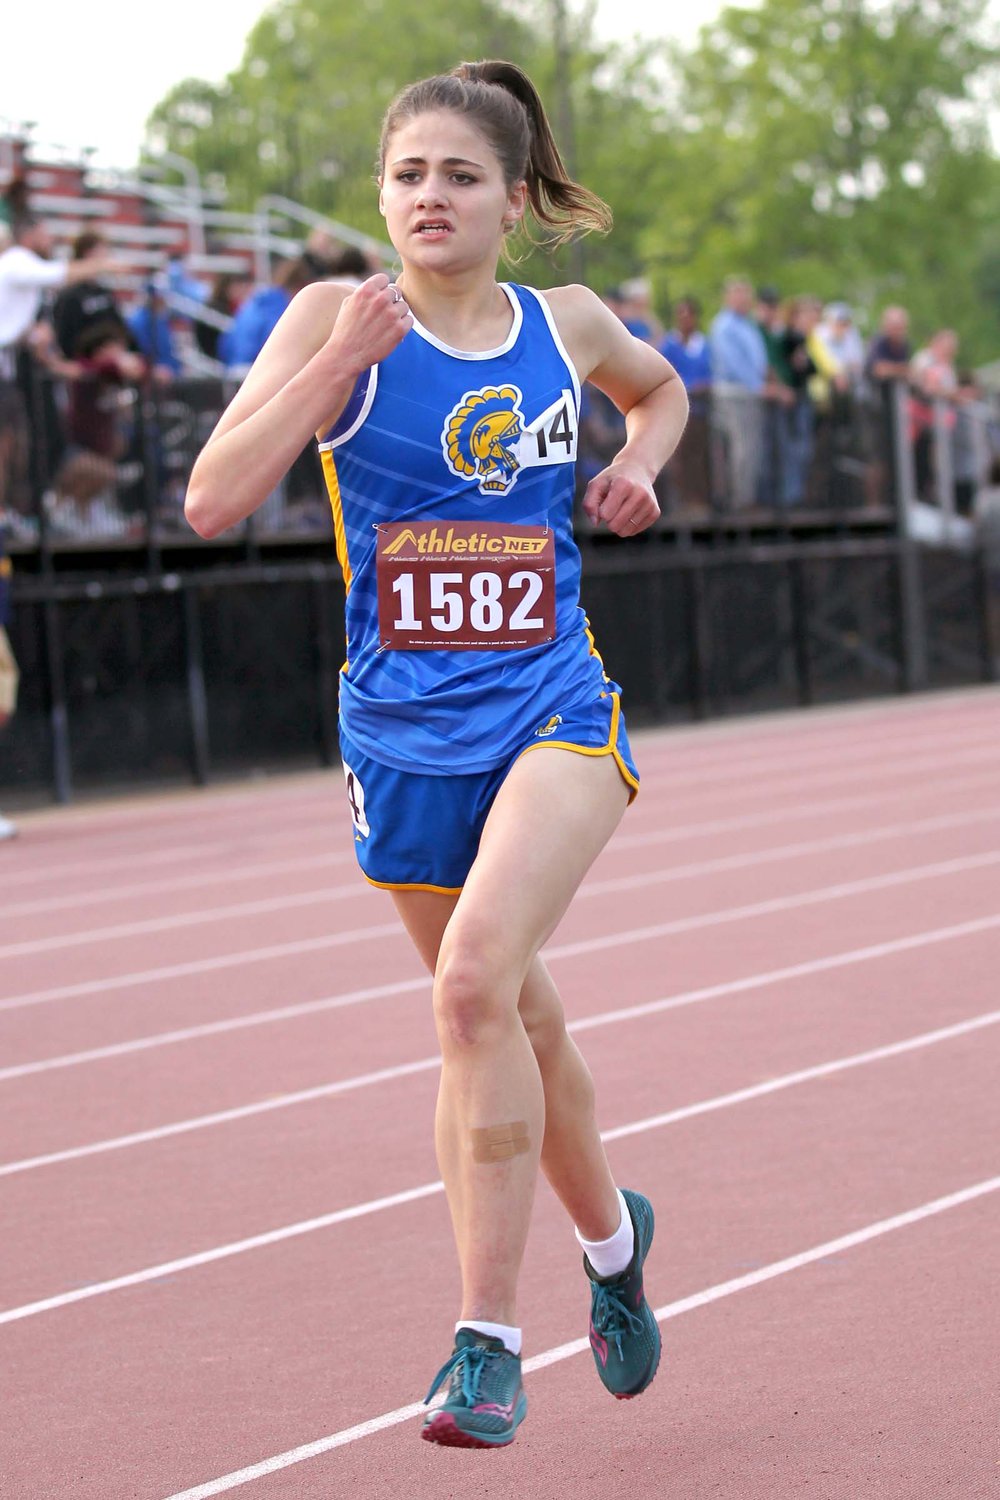 Freshman Sophia Melevage of Crawfordsville ran the 1600m at the Lafayette Jefferson track regional in a time of 5:38.84.